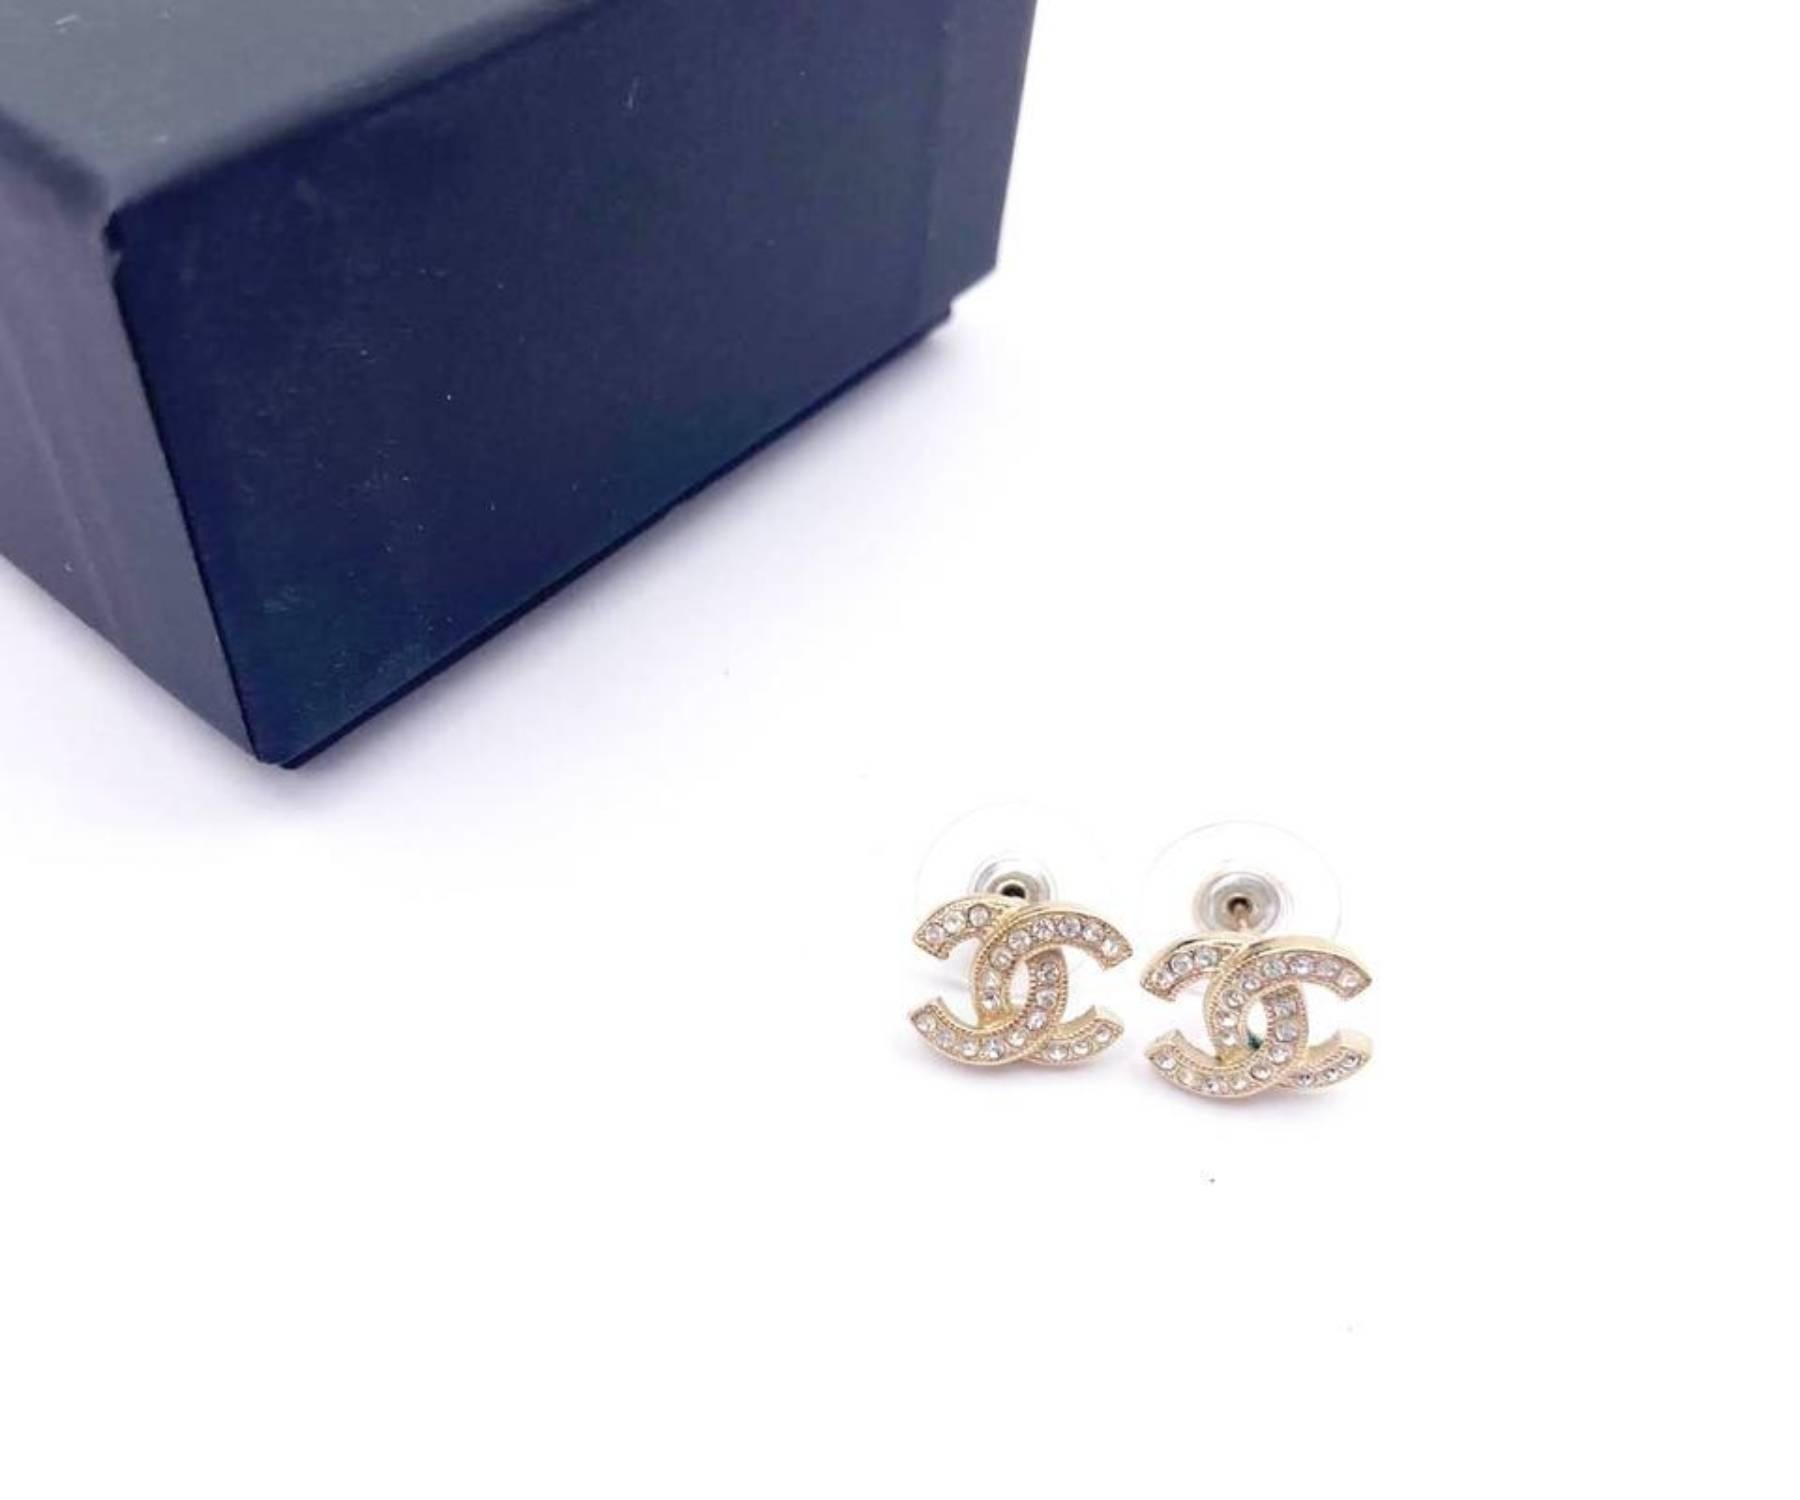 Chanel Brand New Classic Gold CC Crystal Reissued Small Piercing Earrings

* Marked 20
* Made in France
* Comes with the original box, pouch and booklet

-Approximately 0.5